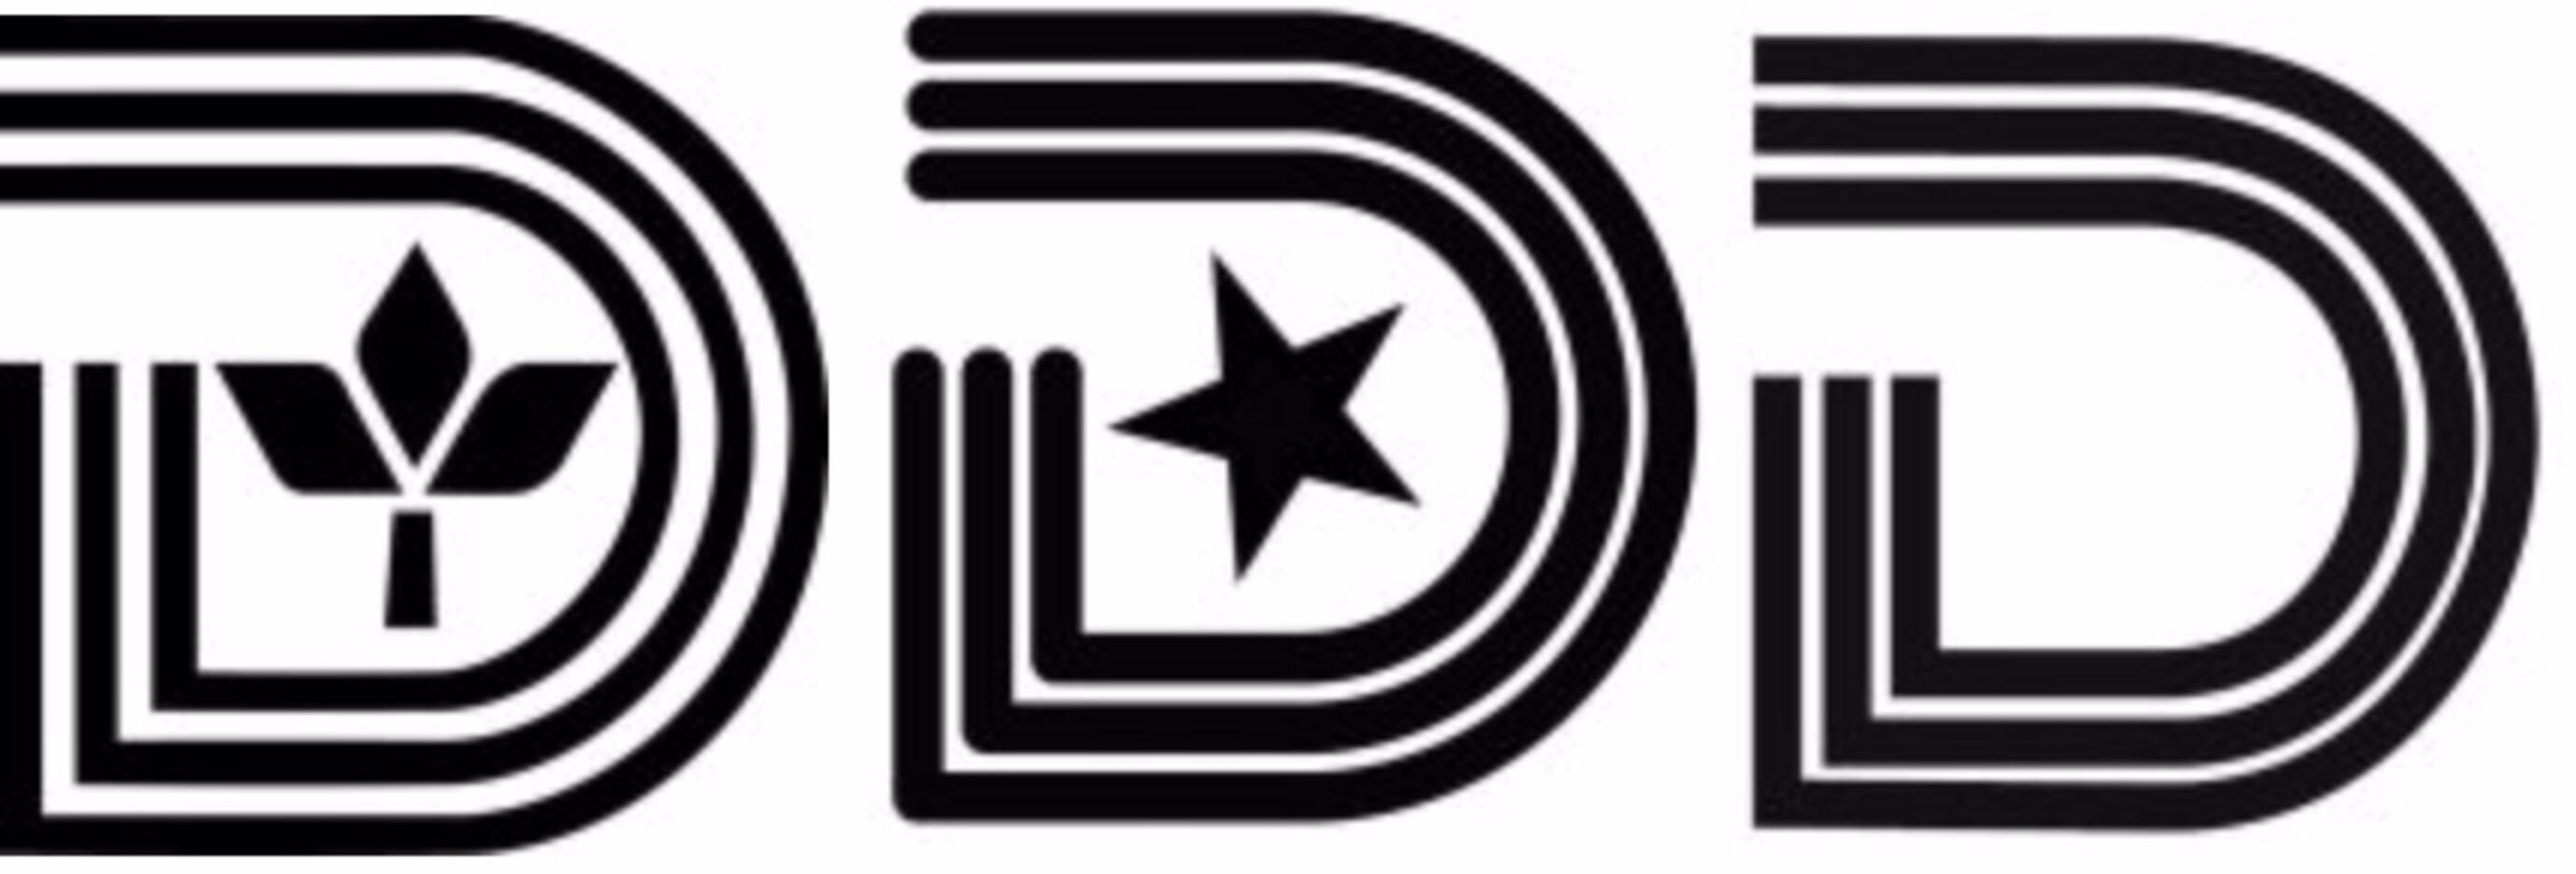 Unauthorized use of City of Dallas Triple D logo